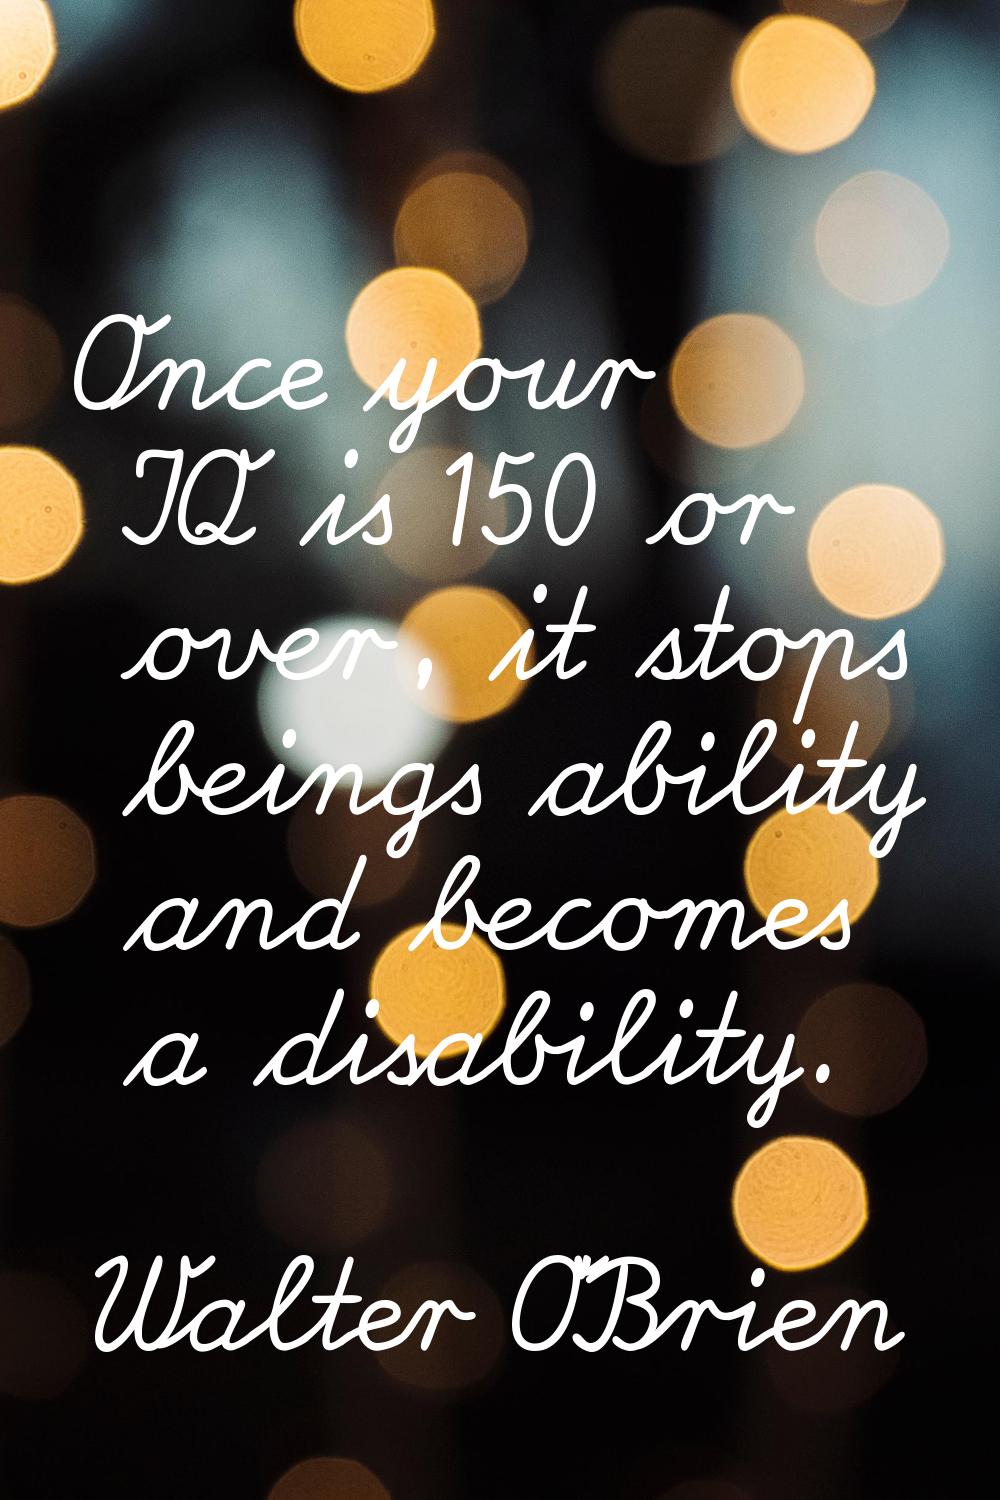 Once your IQ is 150 or over, it stops beings ability and becomes a disability.